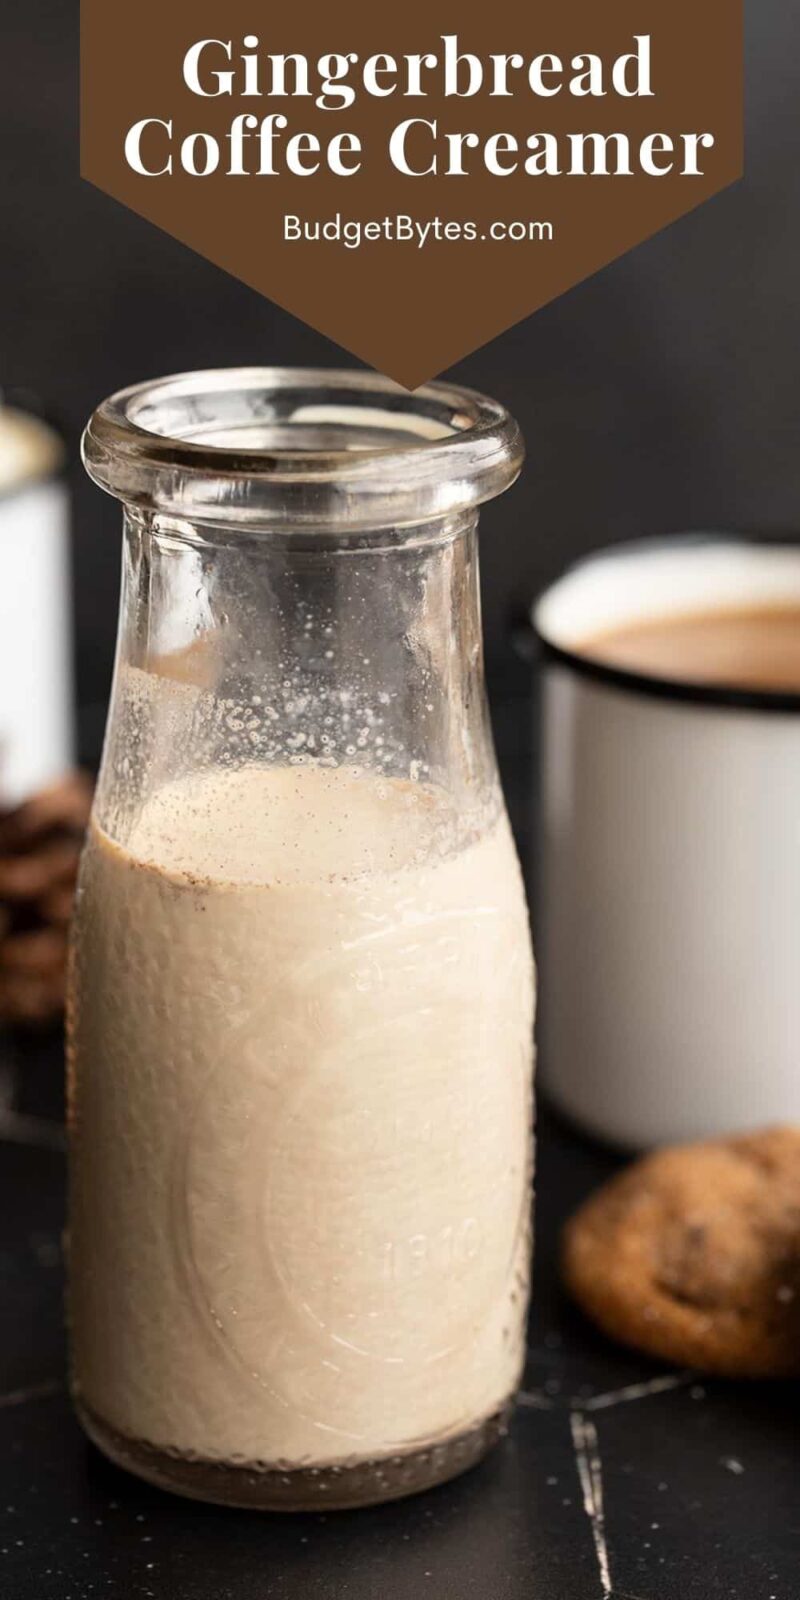 coffee creamer in a glass caraffe, title text at the top